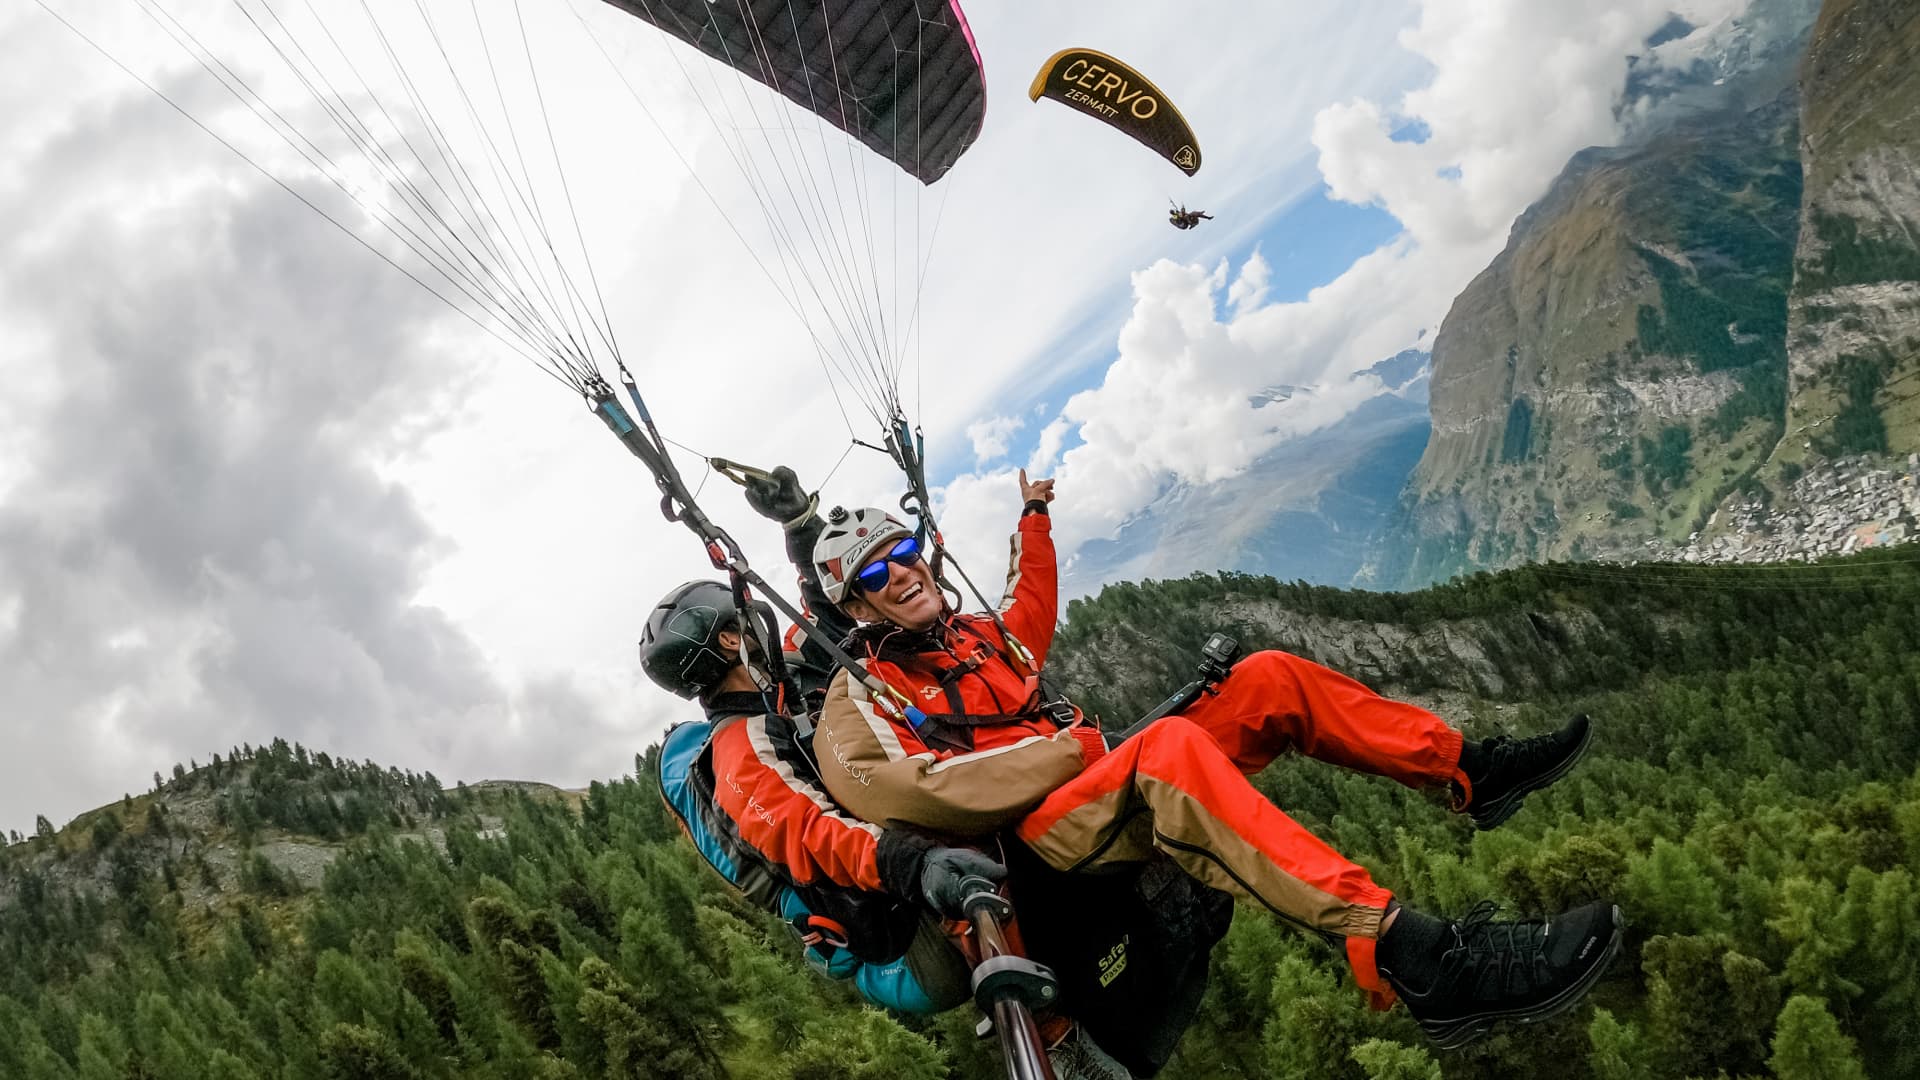 Hudson and Emily Crider paragliding in Switzerland.